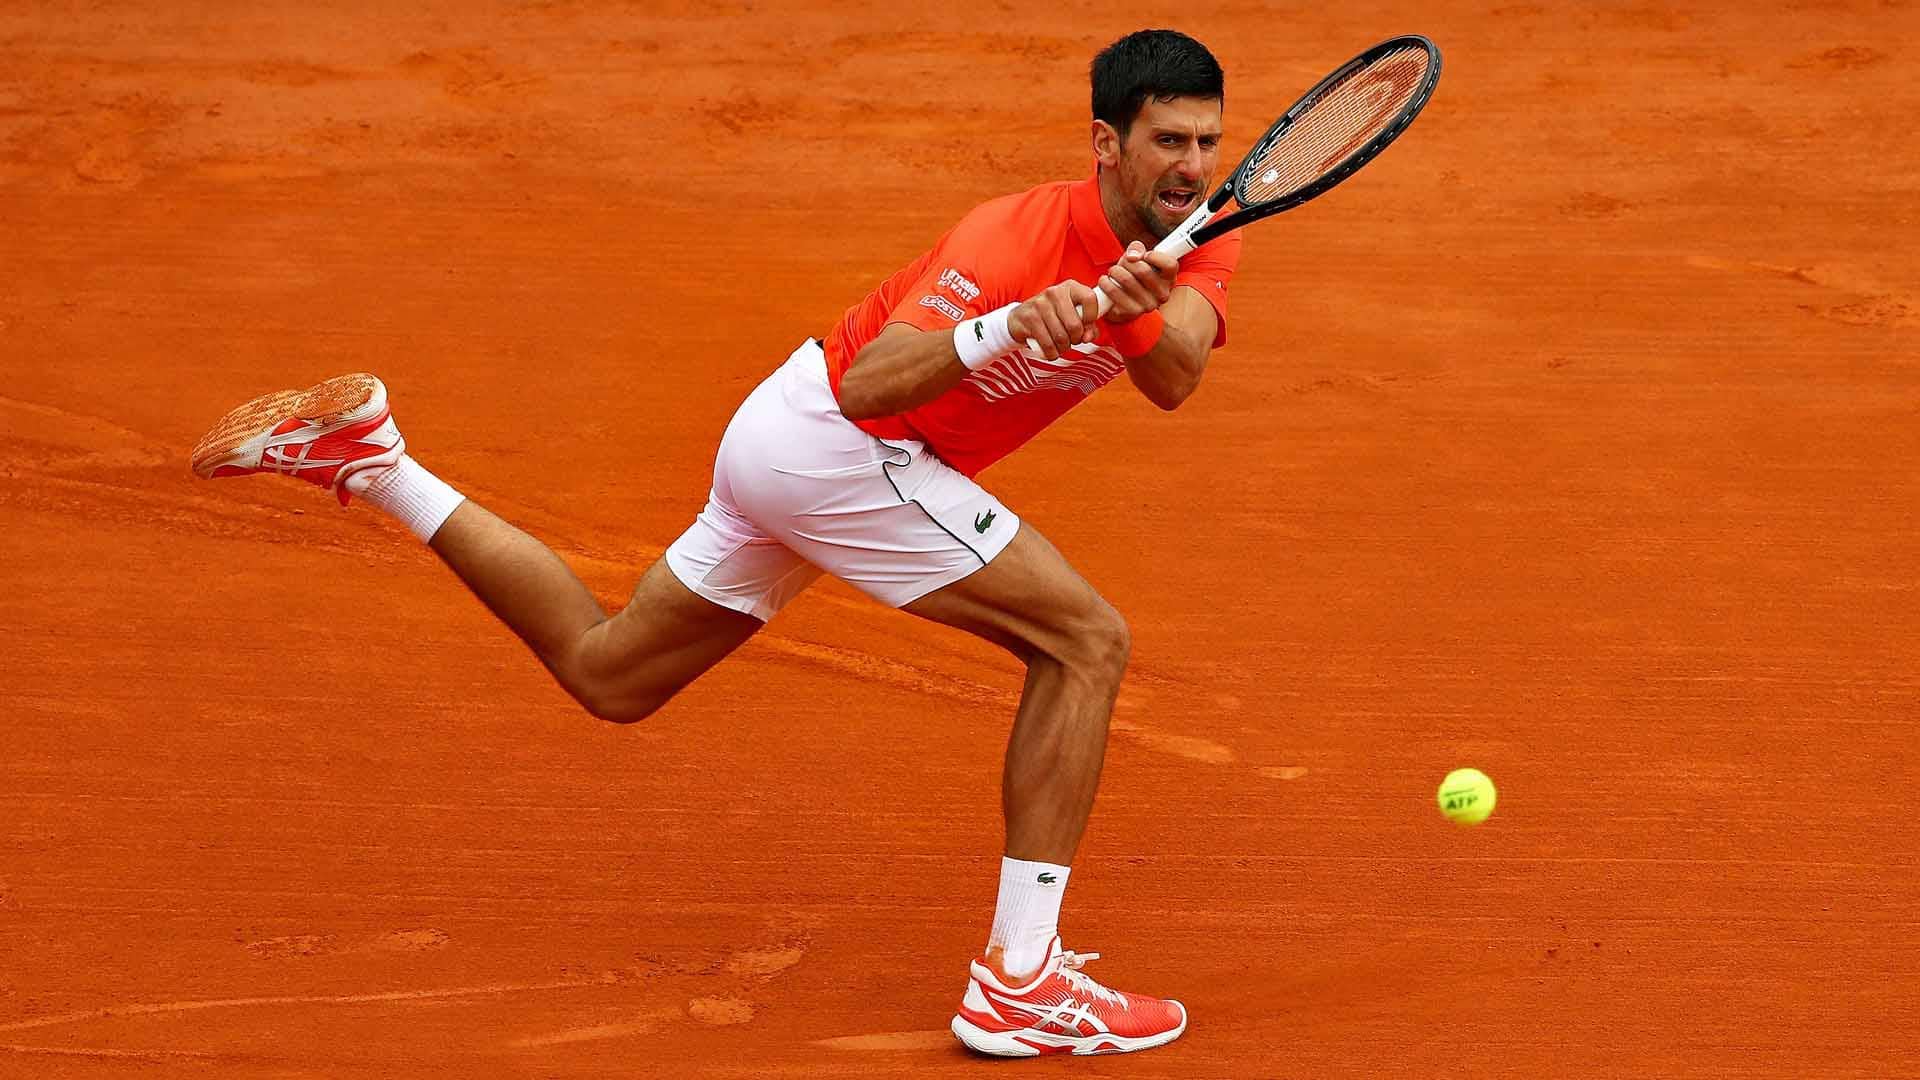 Two-time champion Novak Djokovic could face an early test in his opening match at the Rolex Monte-Carlo Masters.